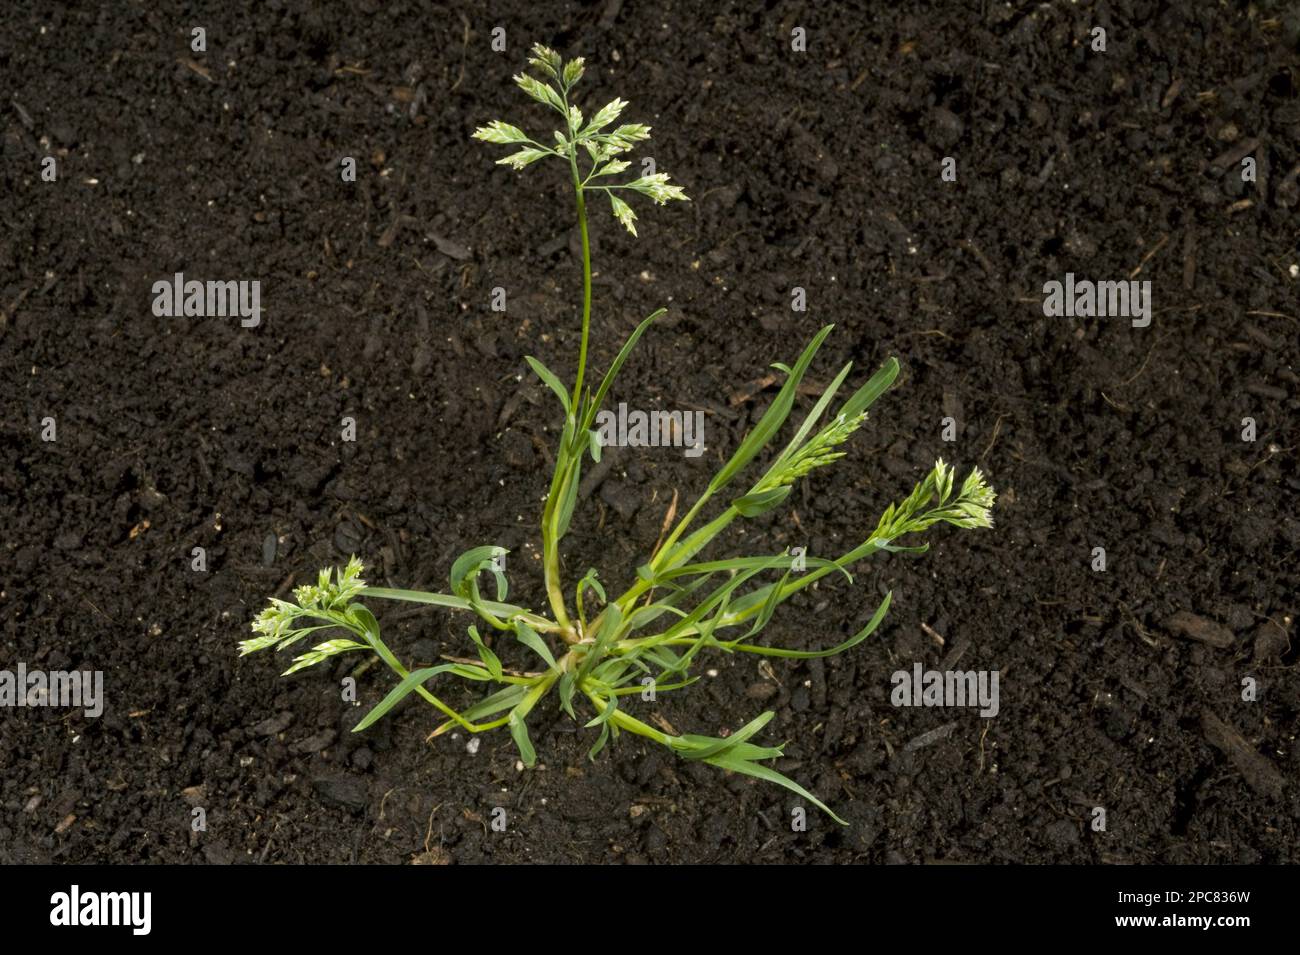 Annual meadow-grass, Poa annua, with tillers and flower on annual garden and agriculture weed Stock Photo